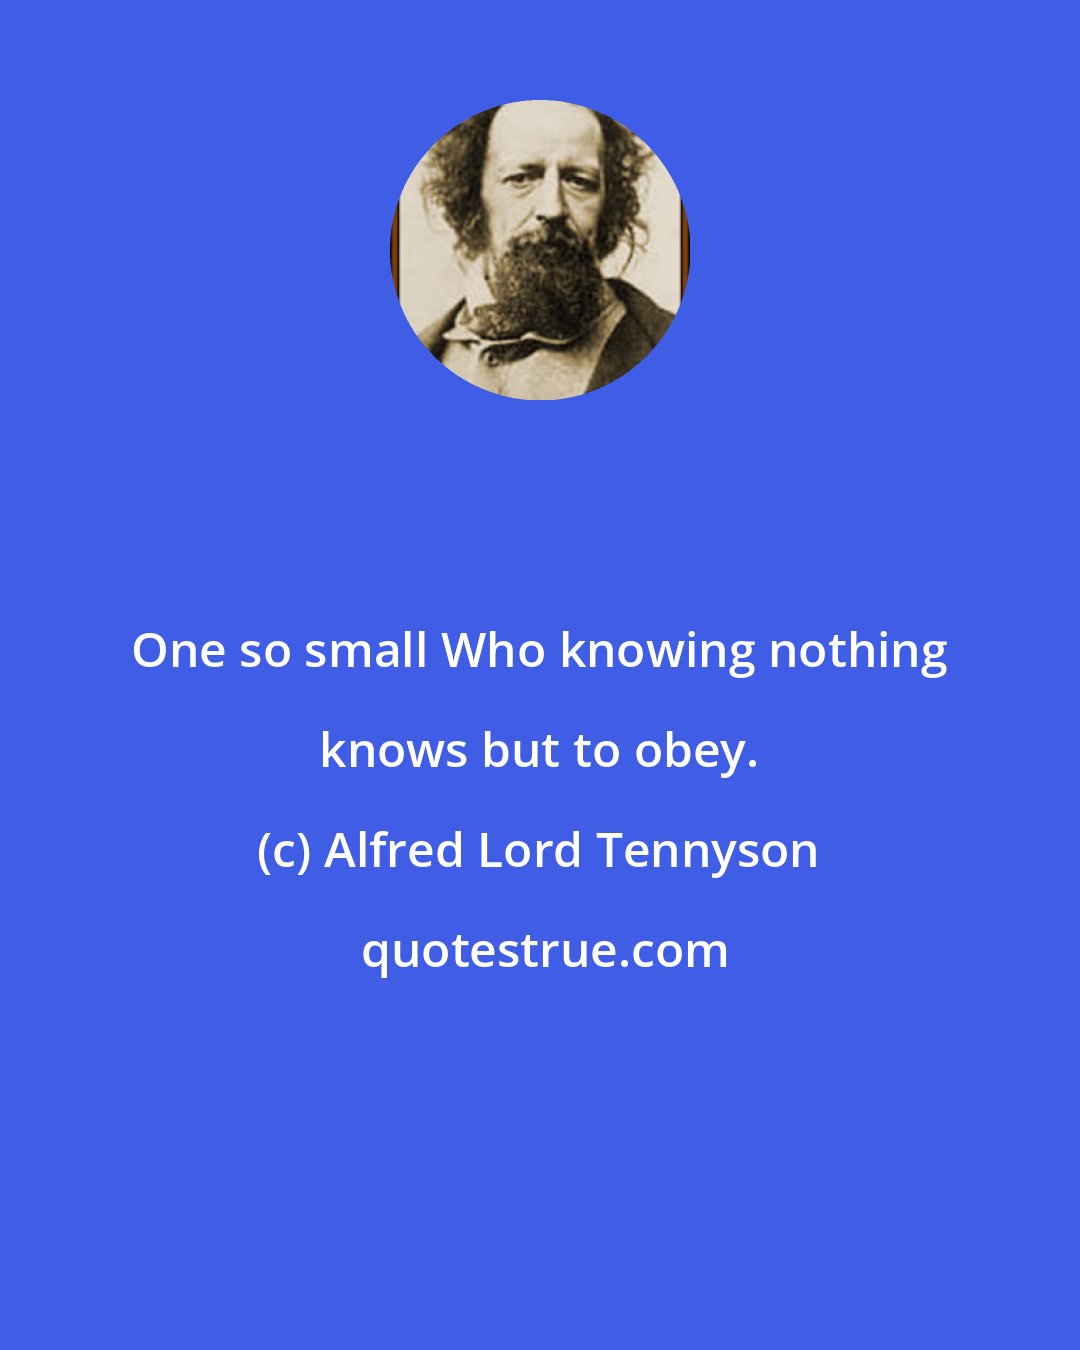 Alfred Lord Tennyson: One so small Who knowing nothing knows but to obey.